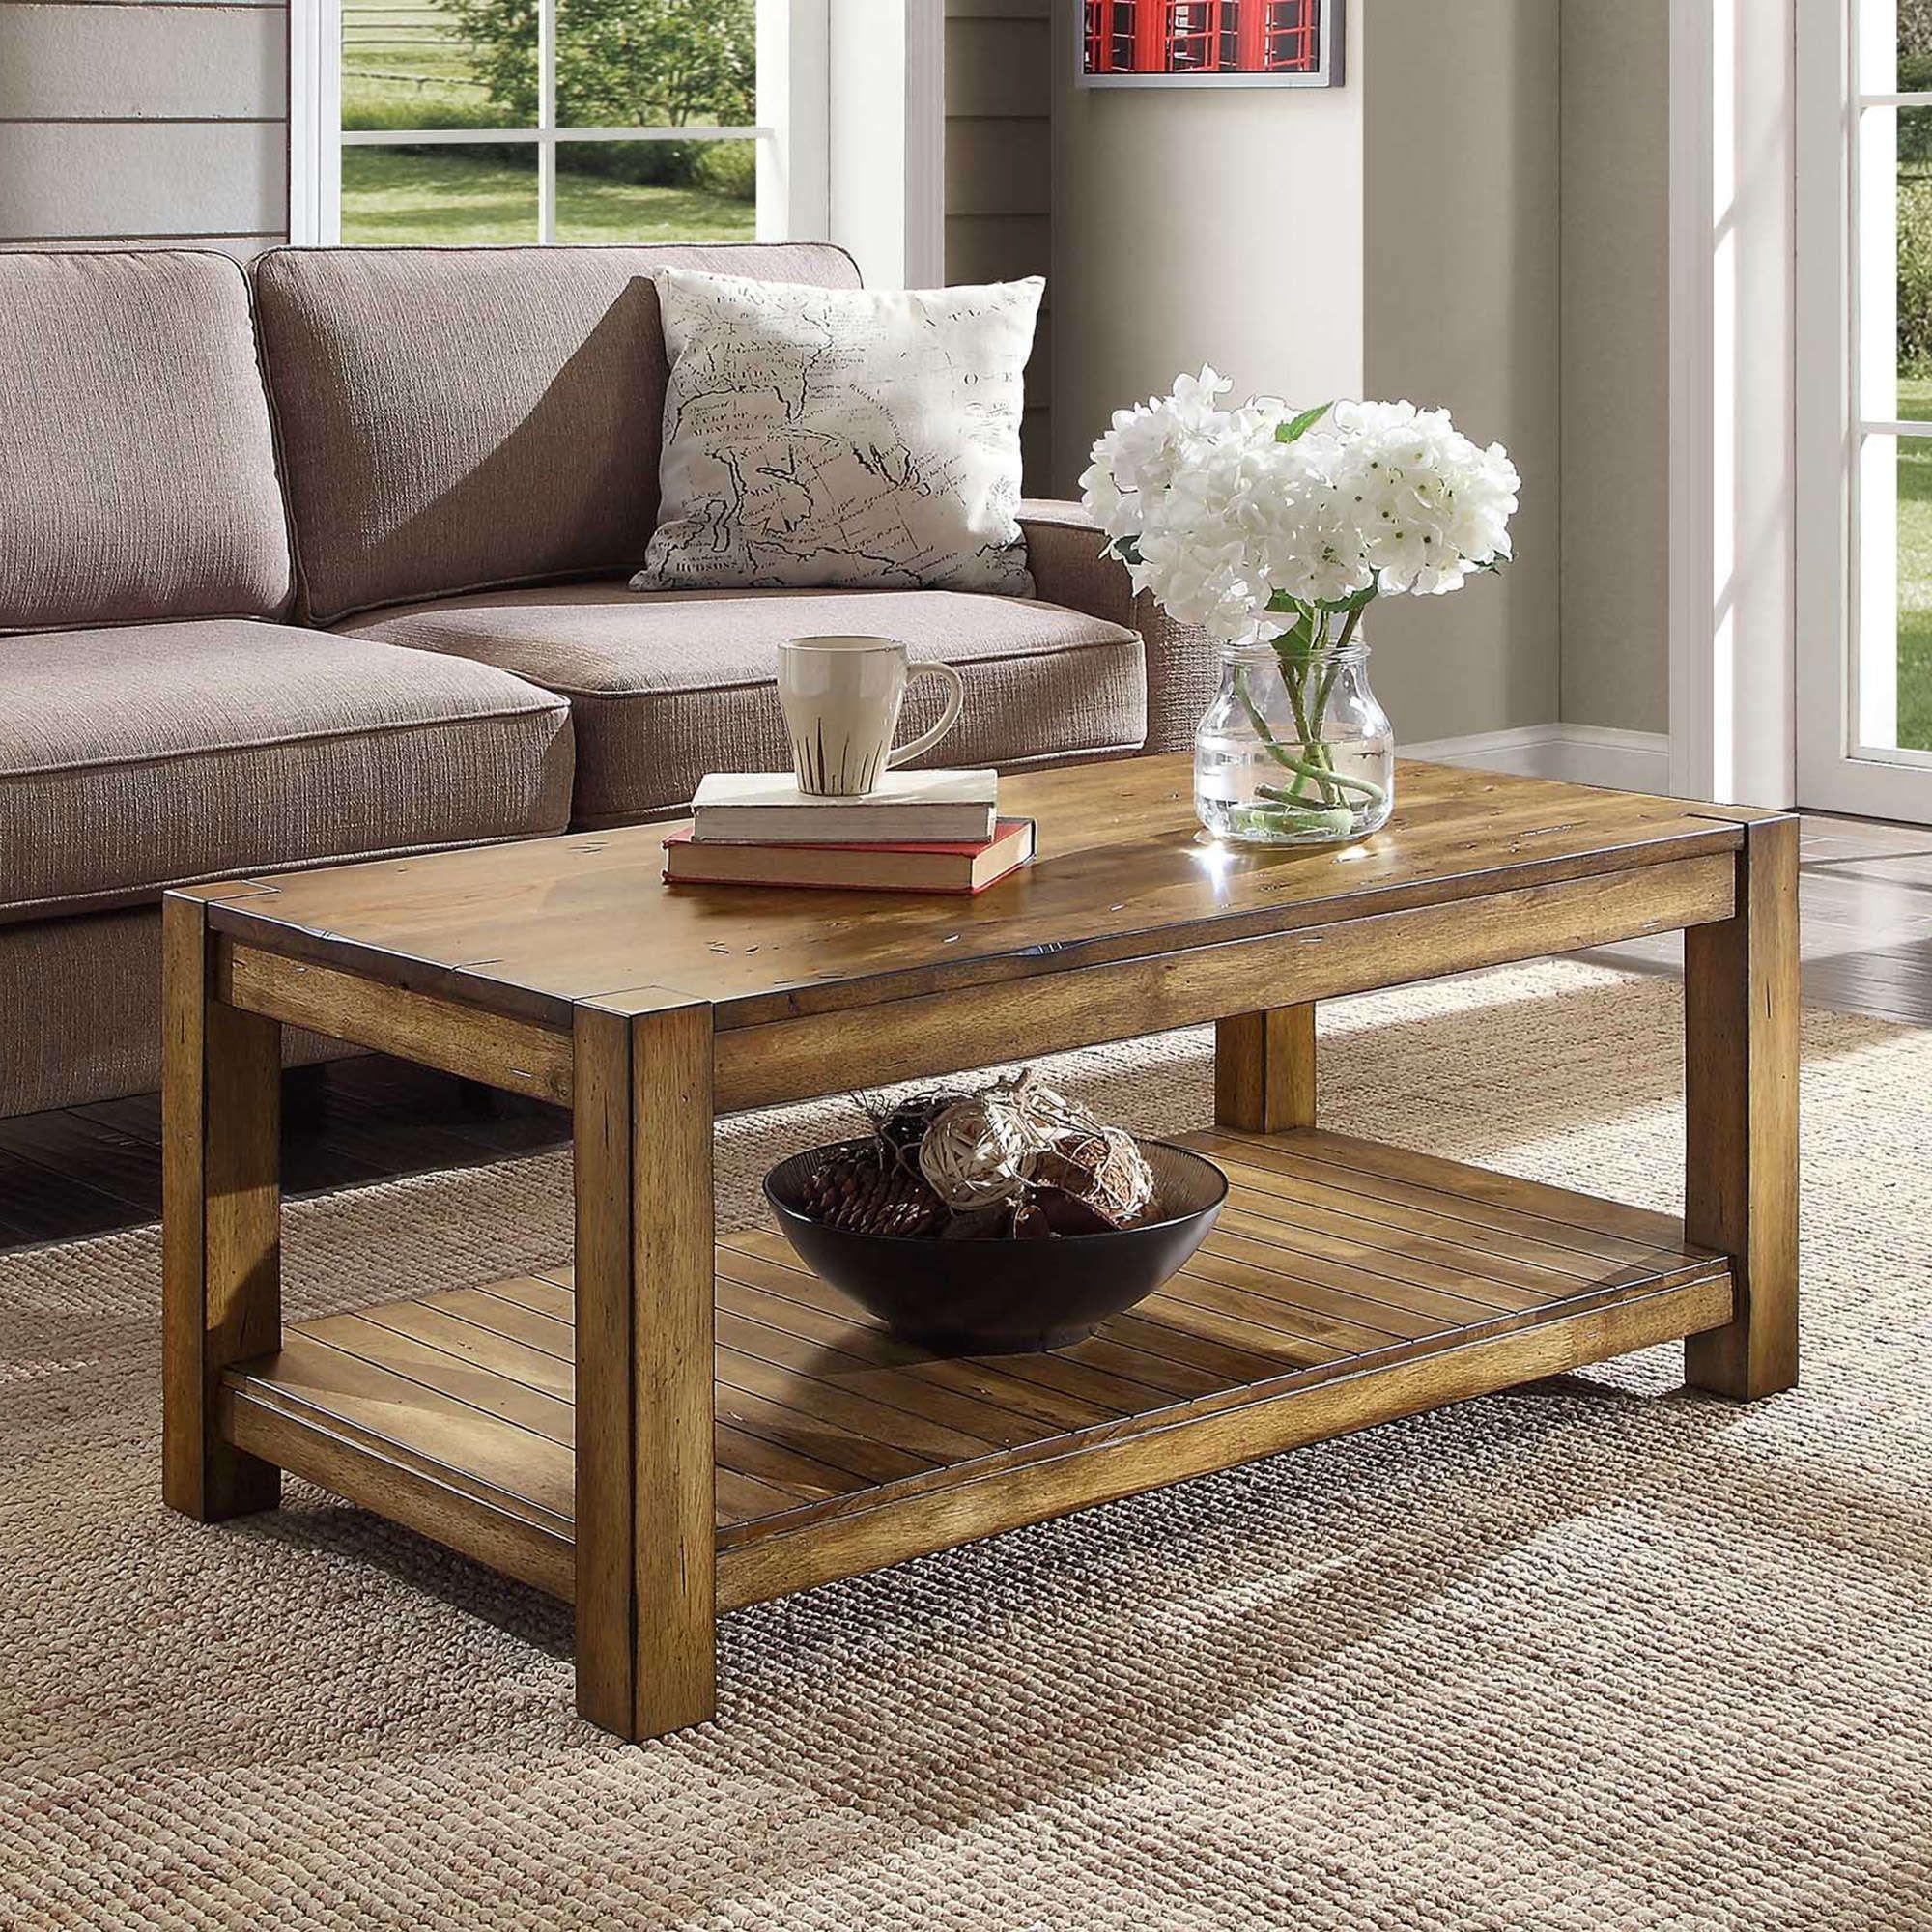 Better Homes & Gardens Bryant Solid Wood Coffee Table, Rustic Maple Intended For Rustic Coffee Tables (Gallery 12 of 20)